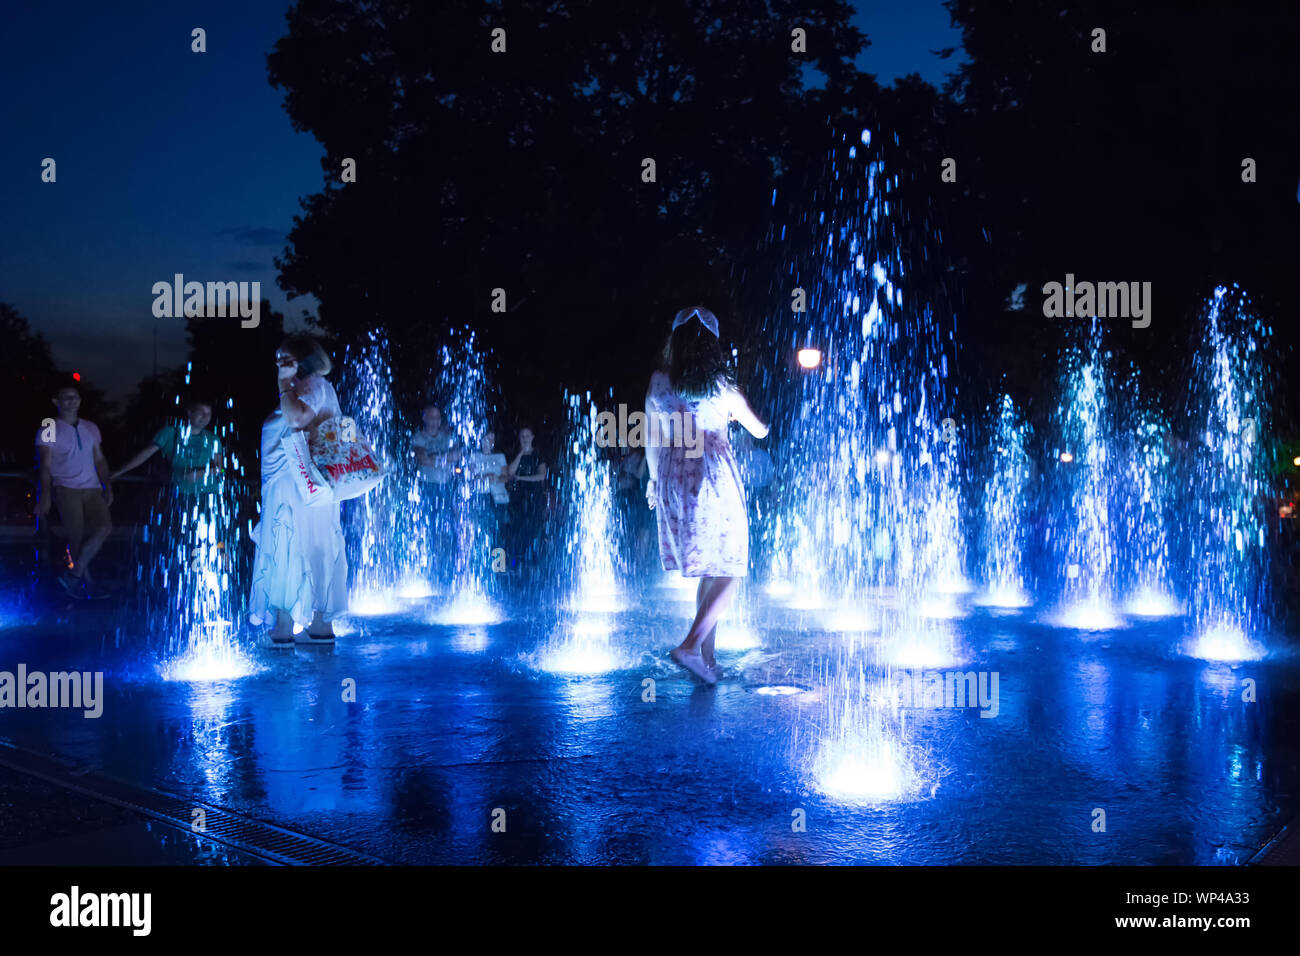 PLOVDIV, BULGARIA - 22 June 2019: Center of Plovdiv is the host of the European Capital of Culture in 2019; Dancers fountain Lights in Plovdiv Stock Photo